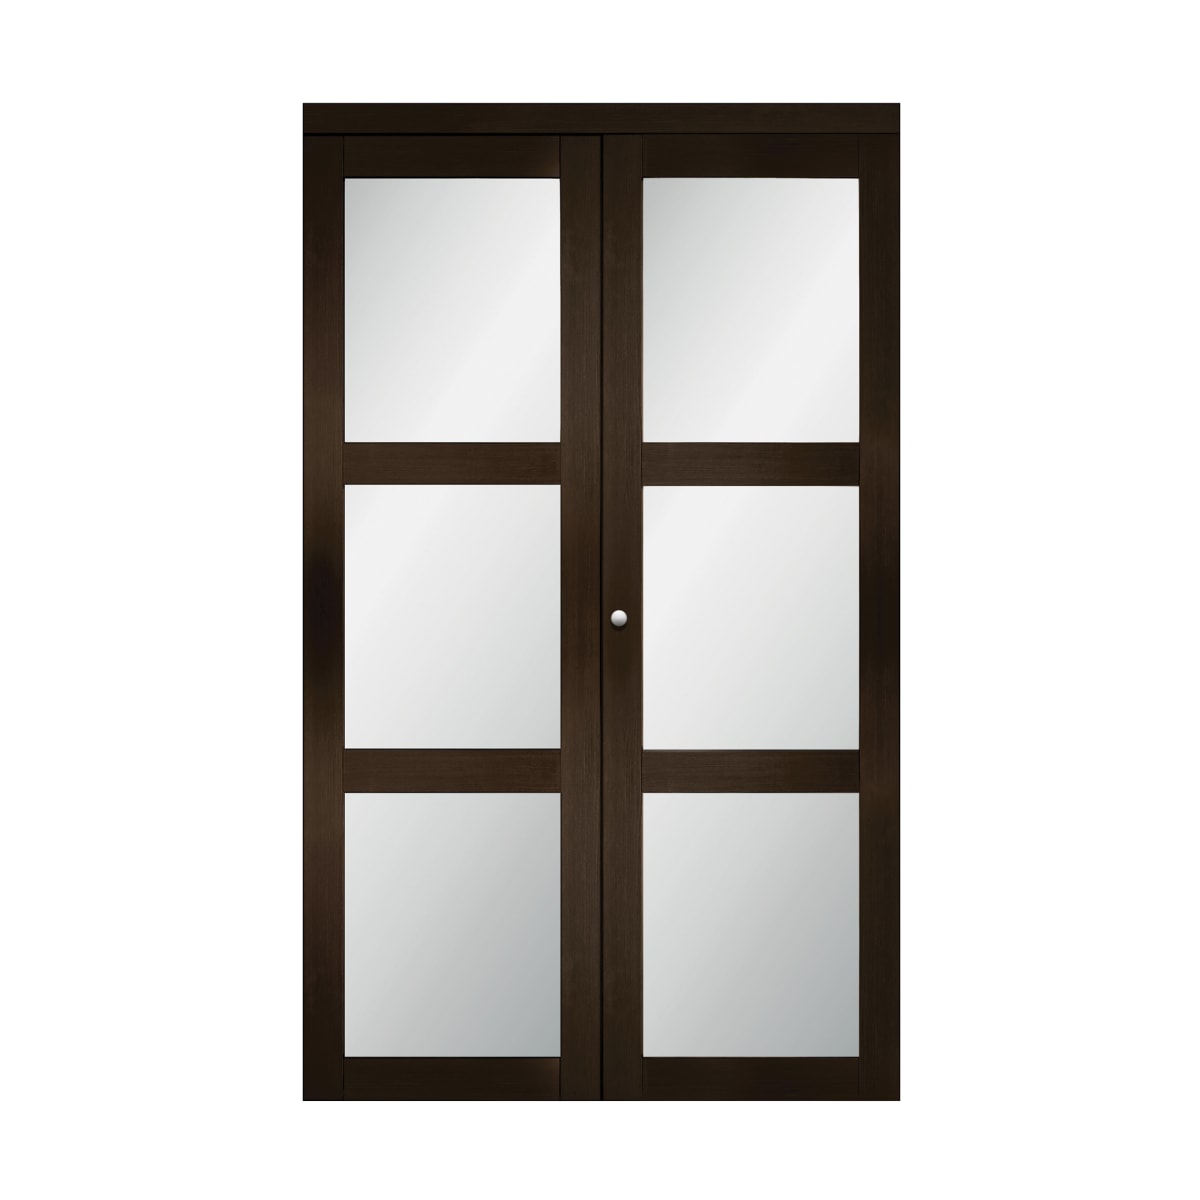 Trimlite 2068138-8433Bf 24 inch by 79 inch Flat 3-Panel Equal Shaker Interior Bifold Door - Primed